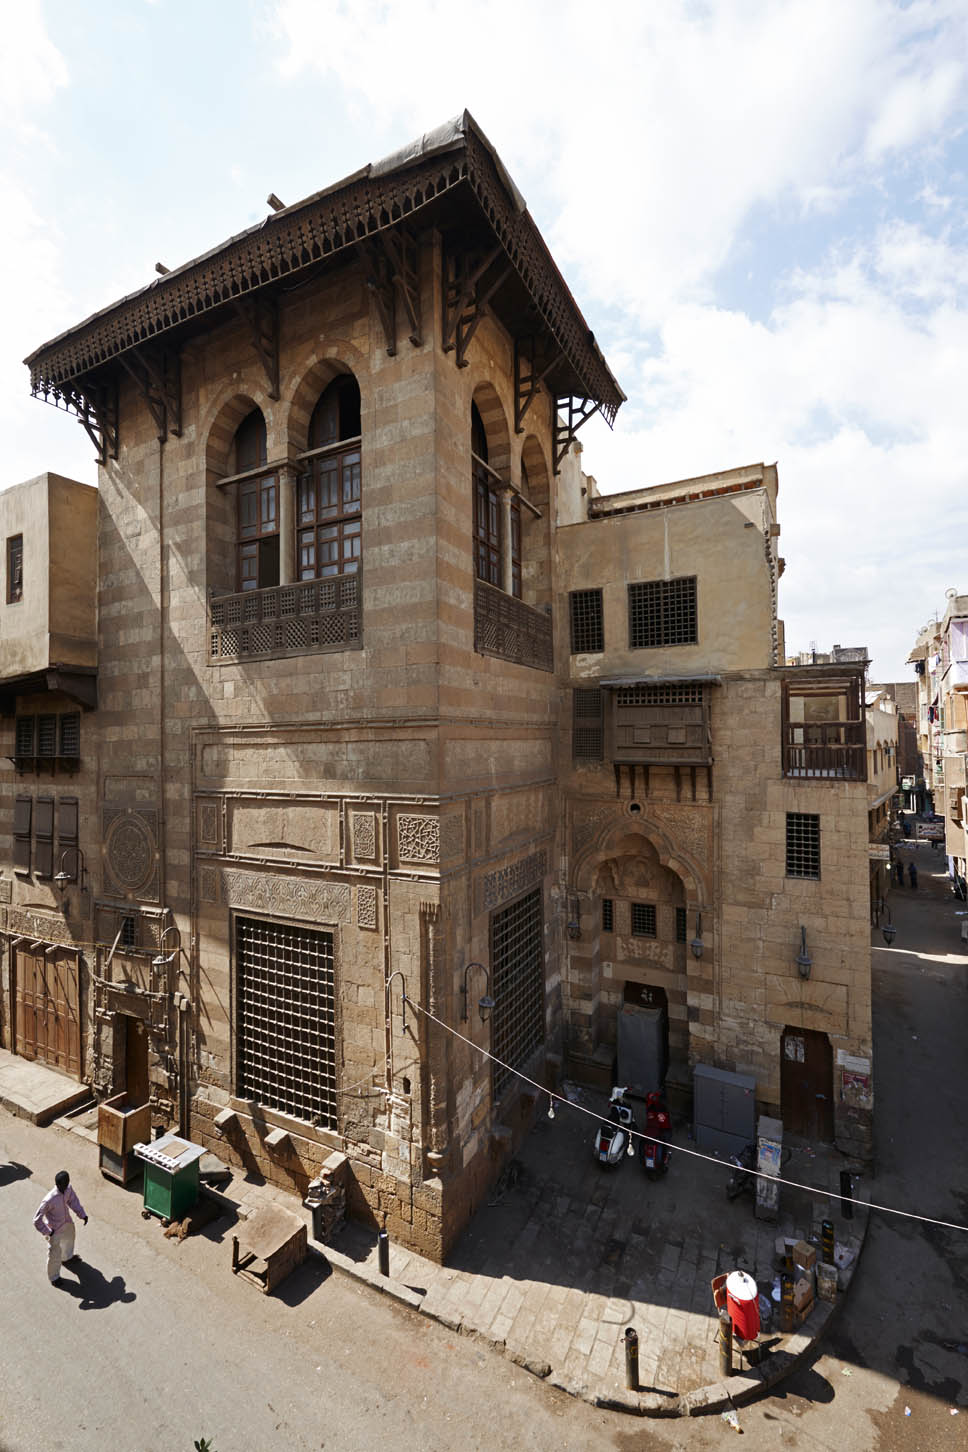 Elevated exterior view of sabil-kuttab